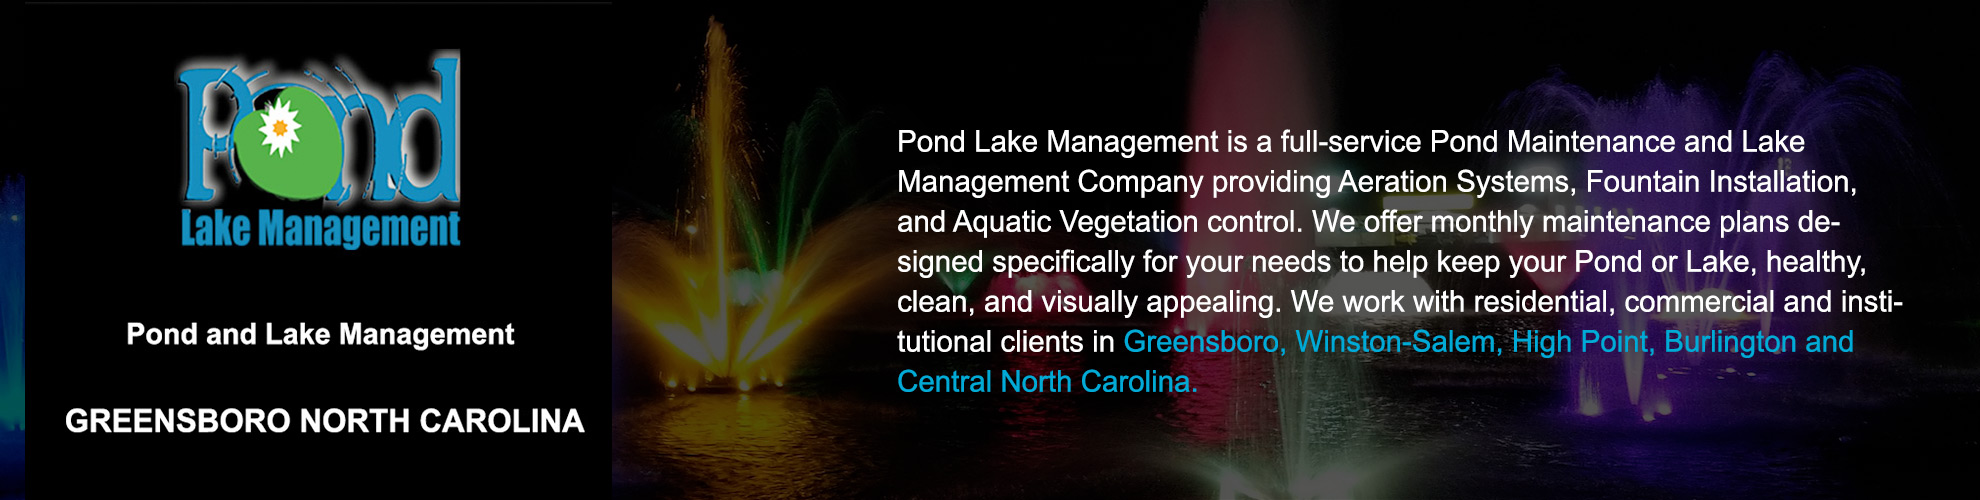 Pond Maintenance, Weed Control, Fountain and Aeration Installation and Maintenance